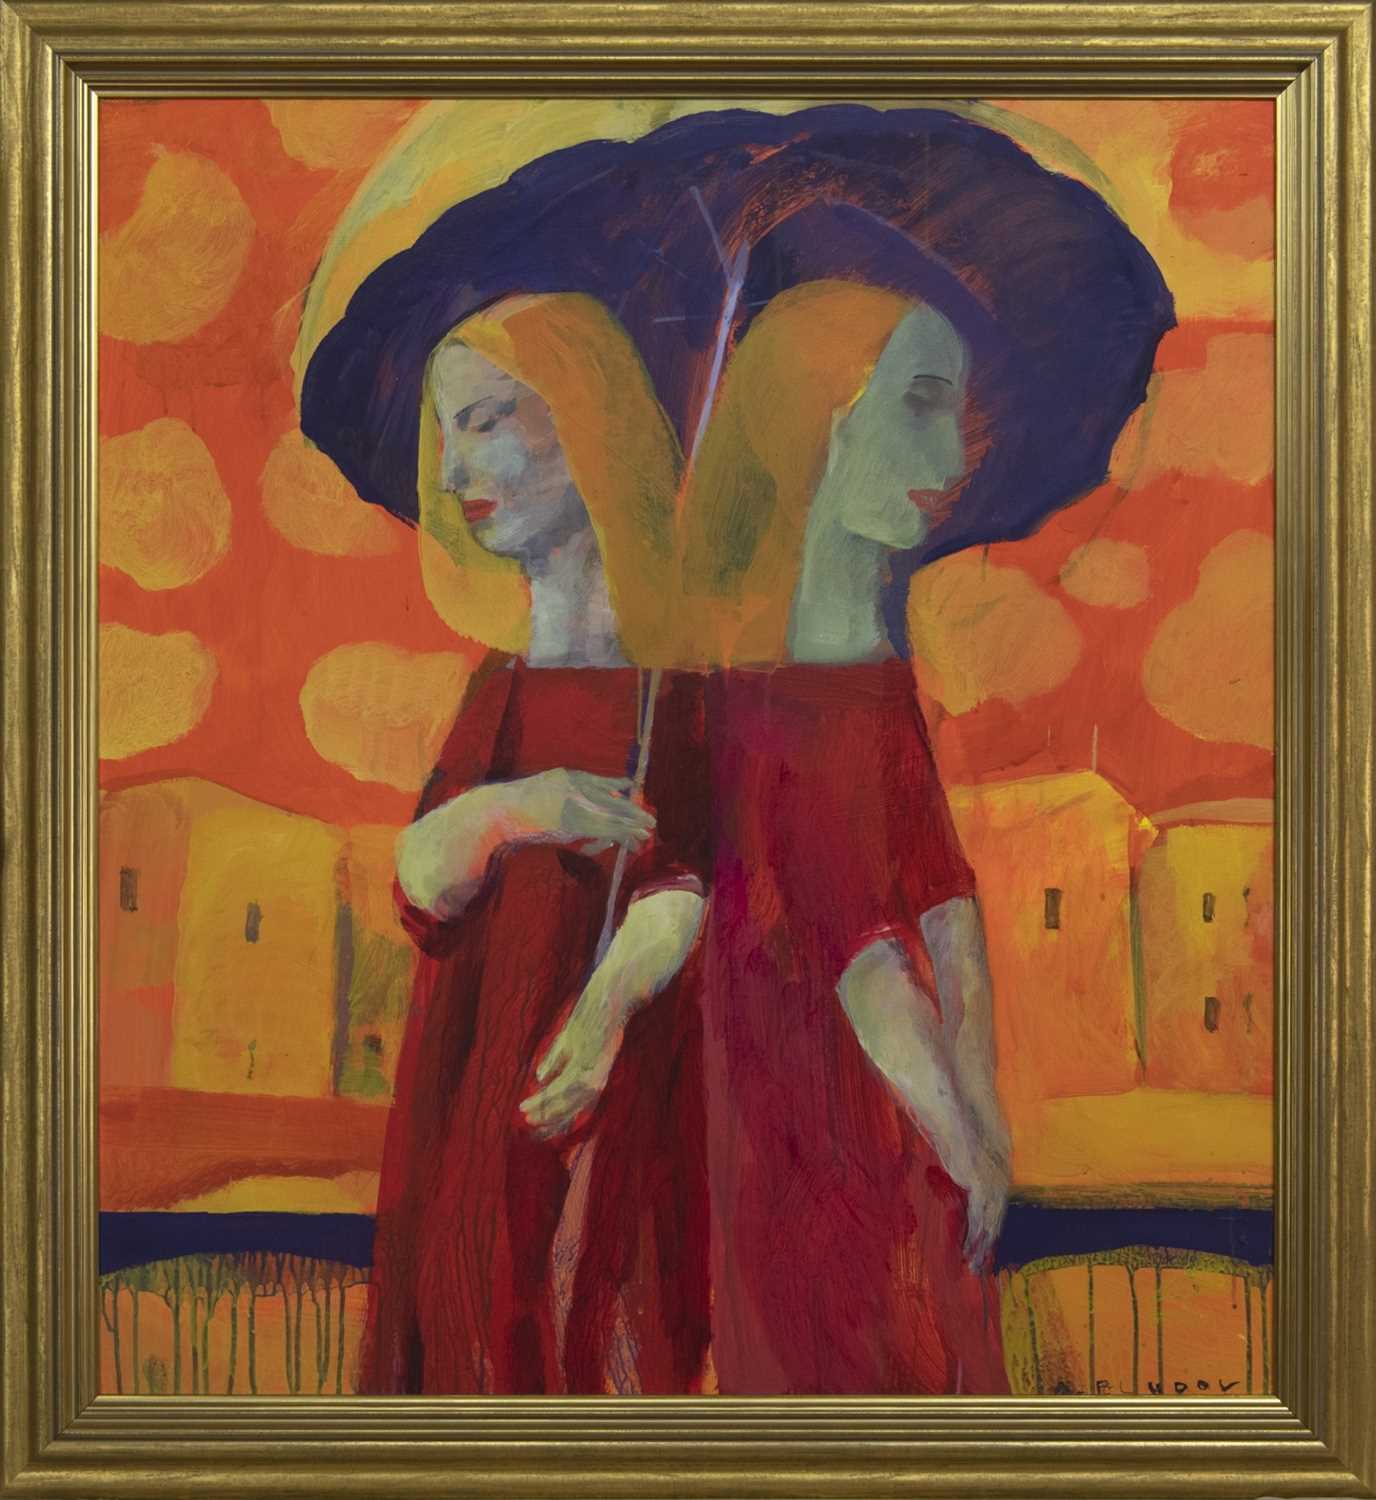 Lot 595 - COUPLE UNDER THE RAIN, AN OIL BY ANDREI BLUDOV